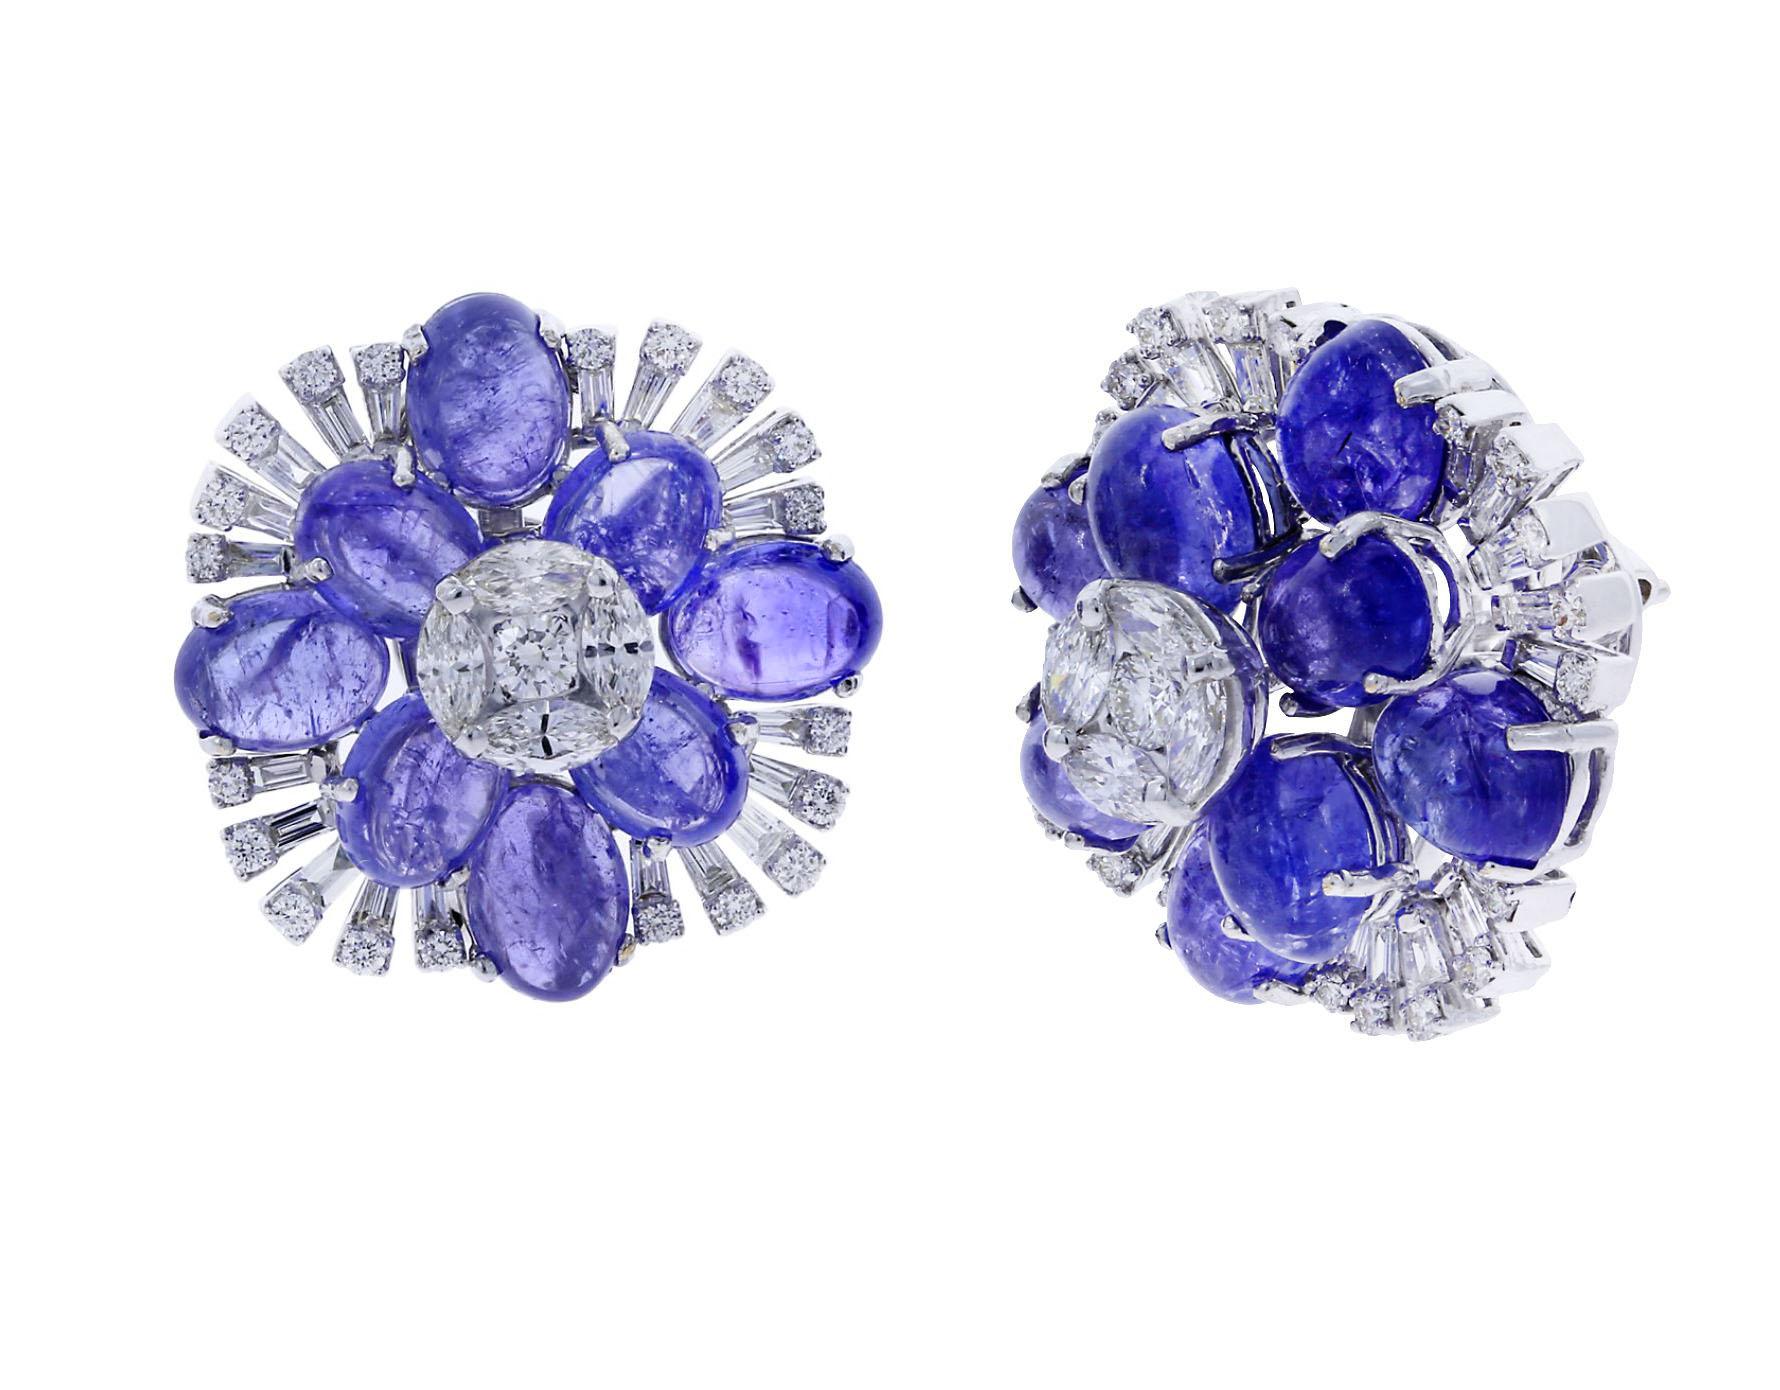 A vibrant pair of Tanzanite Earrings in a floral design with Round Diamonds (0.89 cts), Baguette Diamonds (1.09 cts), Marquise Diamonds (1.14 cts), and Tanzanite (29.9 cts). Measurements 1.18